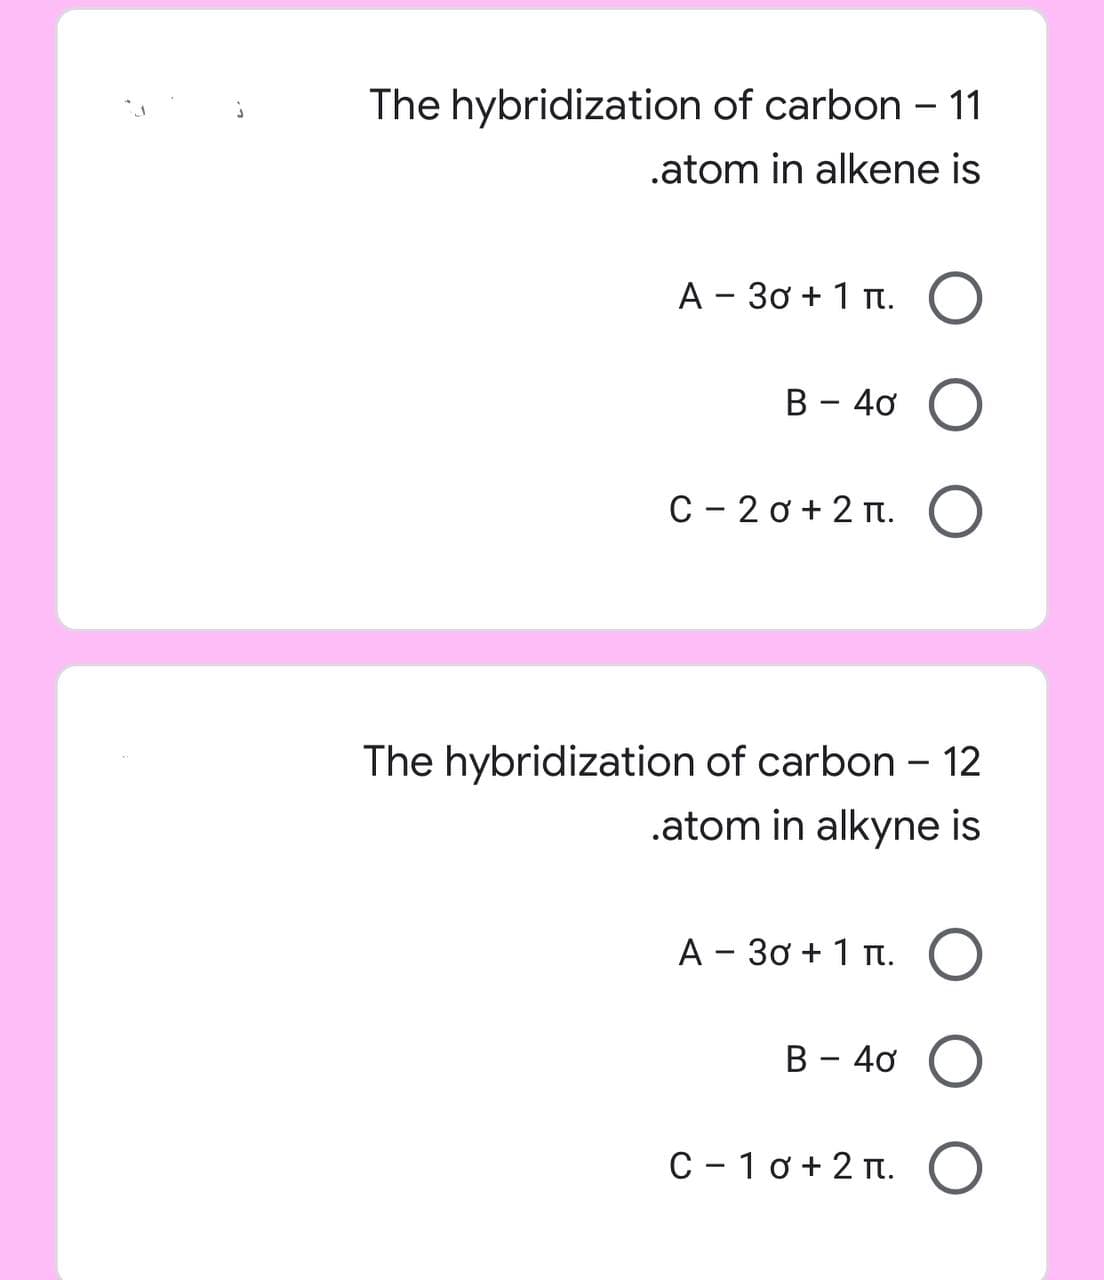 The hybridization of carbon - 11
.atom in alkene is
A - 30+ 1π. O
B - 40 O
C-20+2π. O
The hybridization of carbon - 12
.atom in alkyne is
A - 30 + 1 π. O
B - 40 O
C-10+2+. O